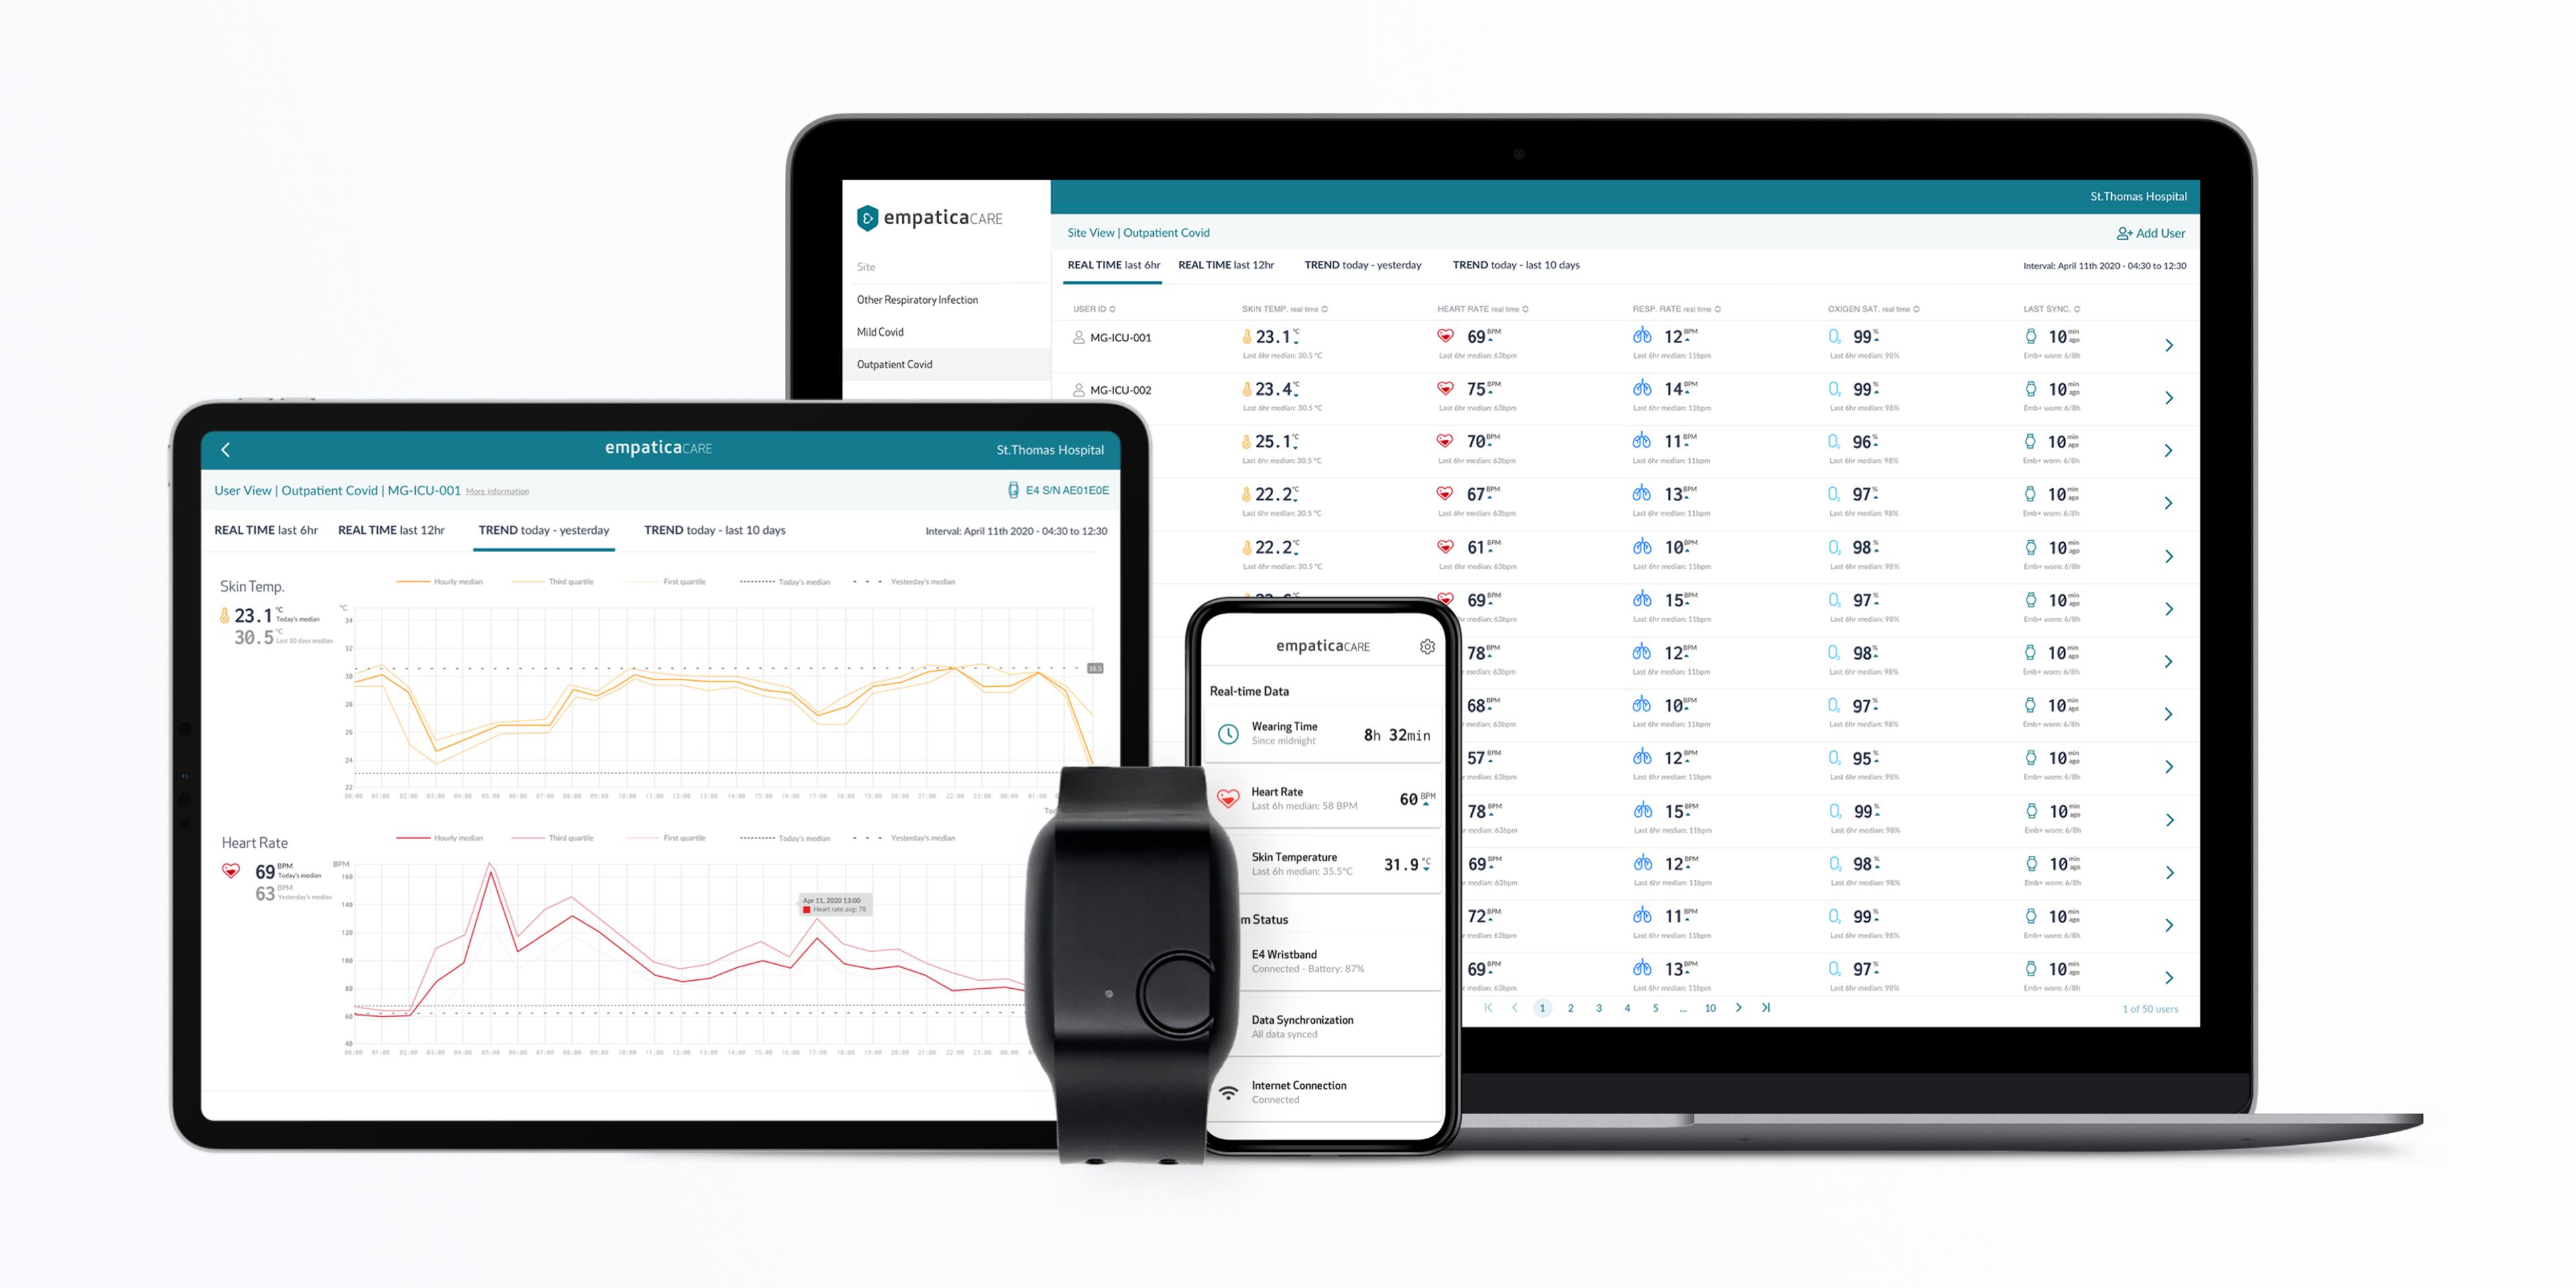 announcing-empatica-care-a-new-way-to-remotely-monitor-the-health-of-thousands-cover-image